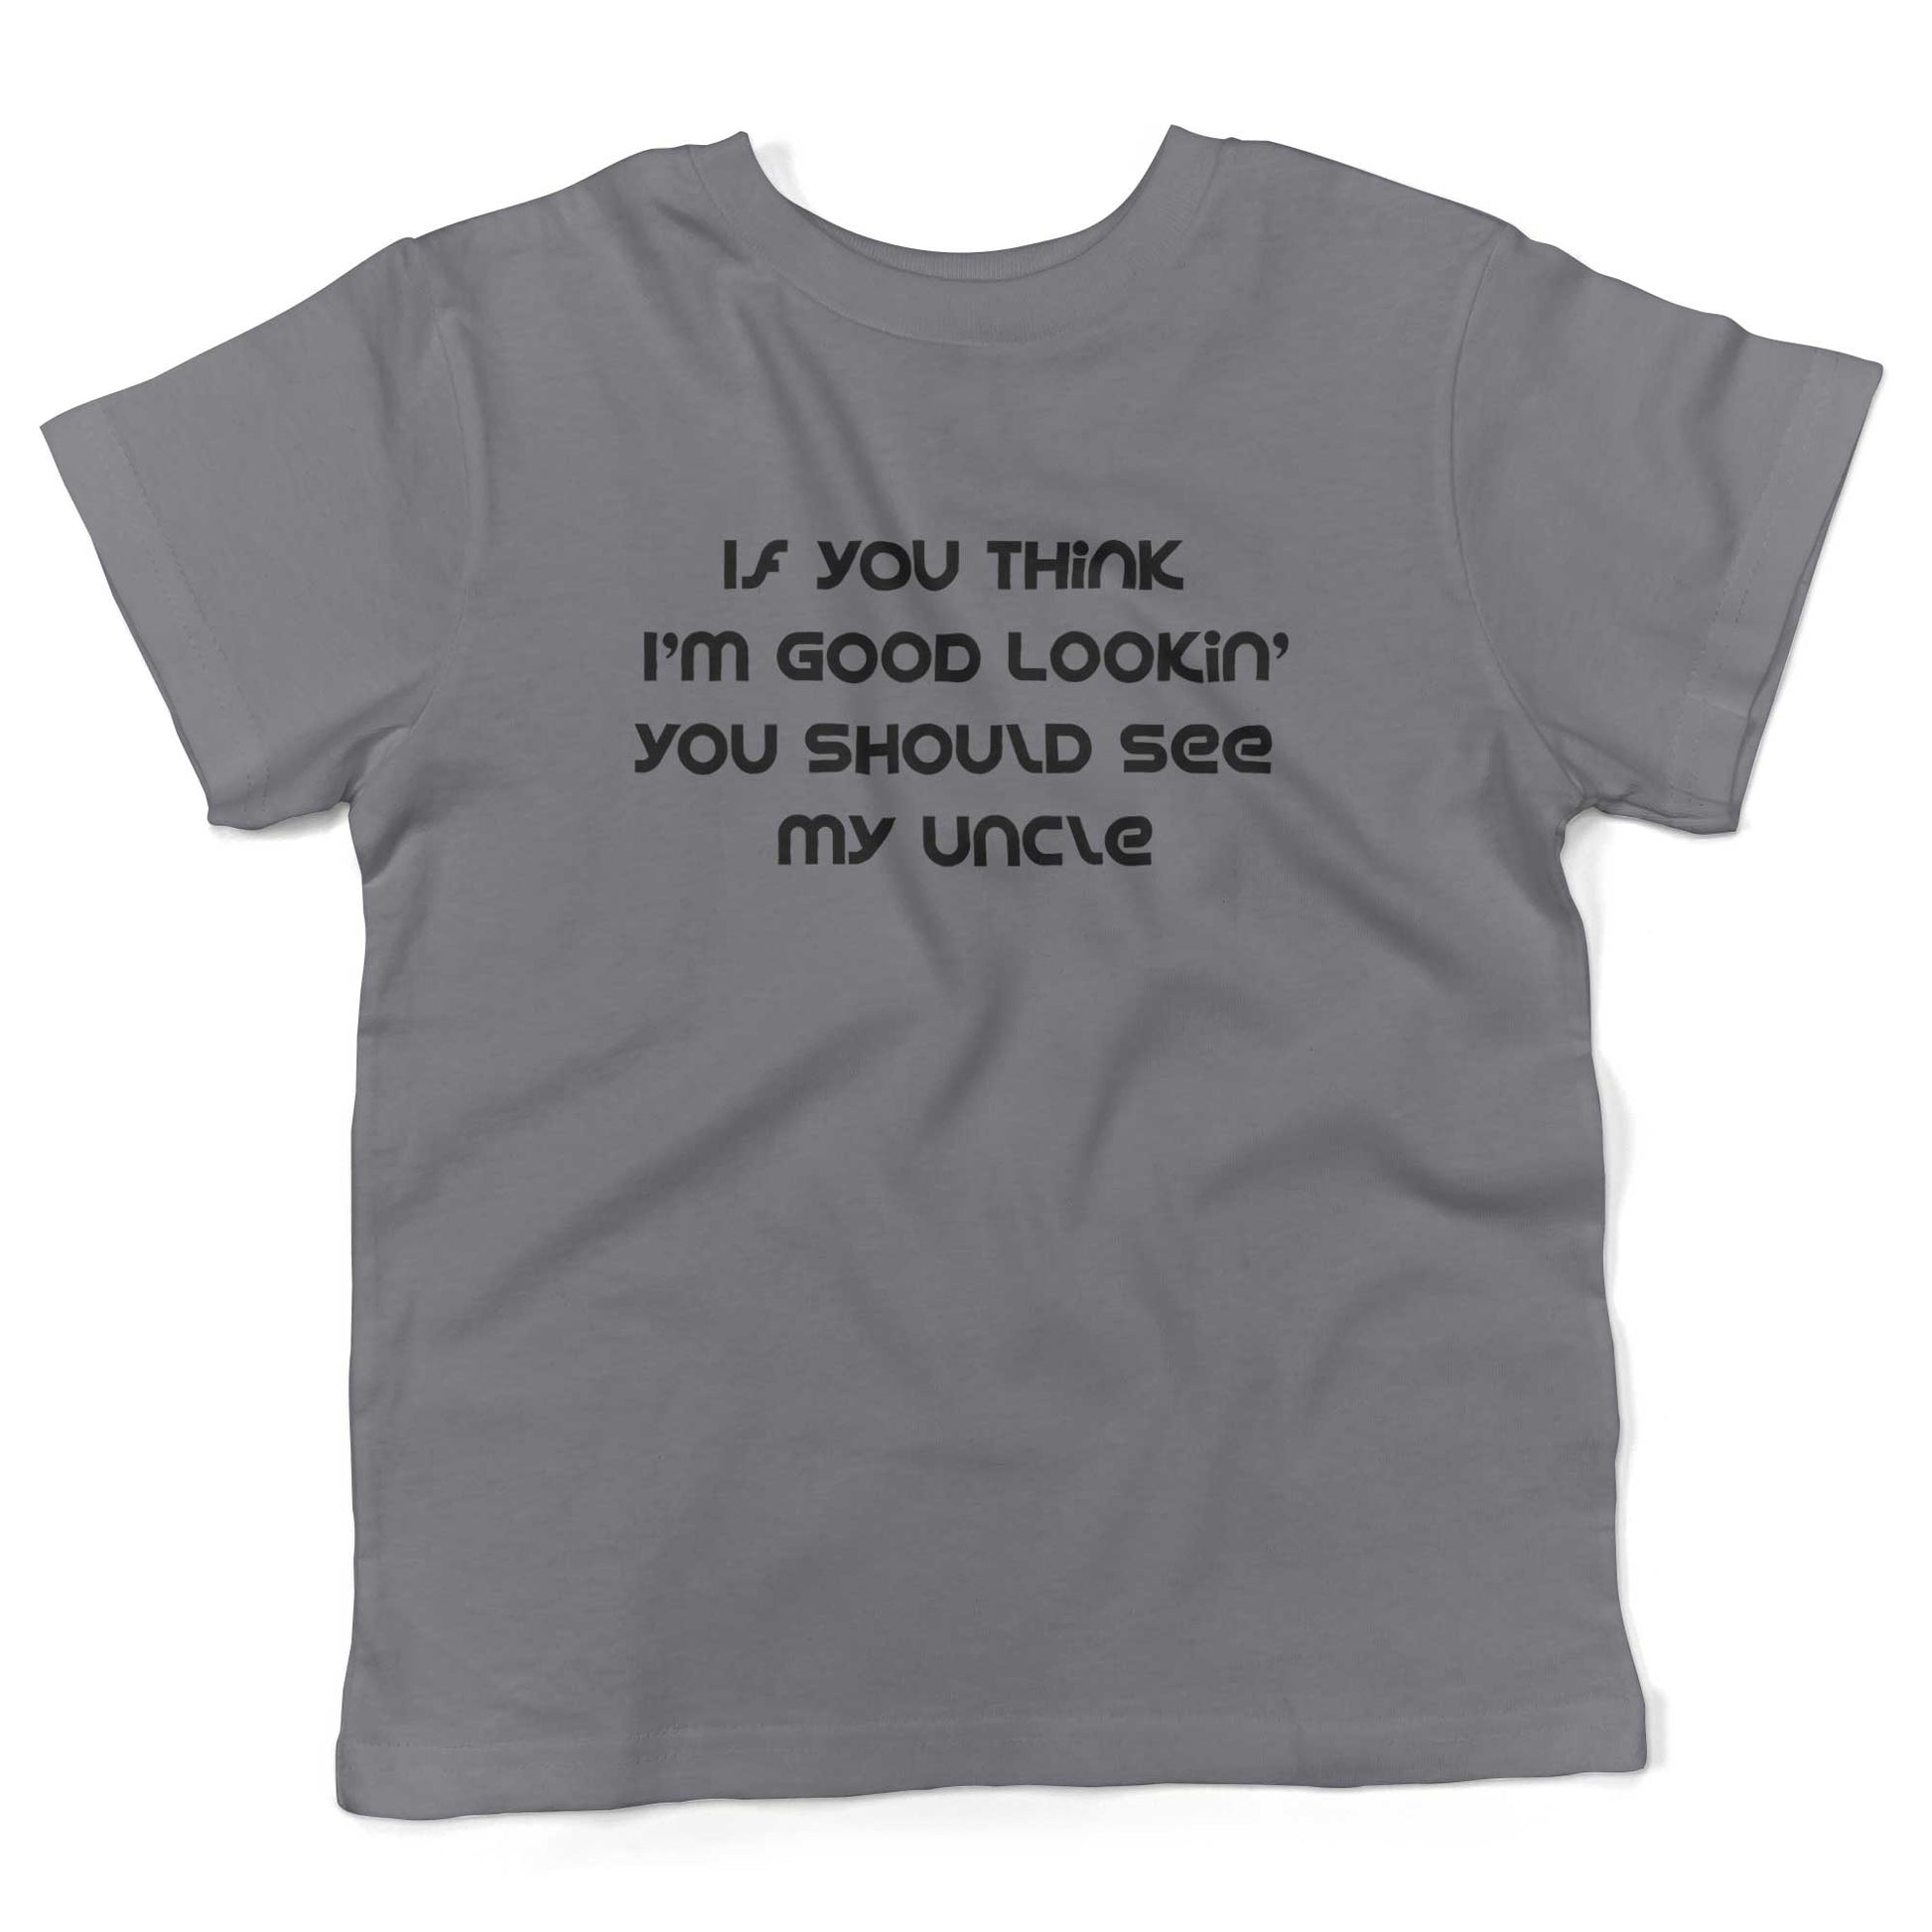 If You Think I'm Good Lookin' You Should See My Uncle Toddler Shirt-Slate-2T